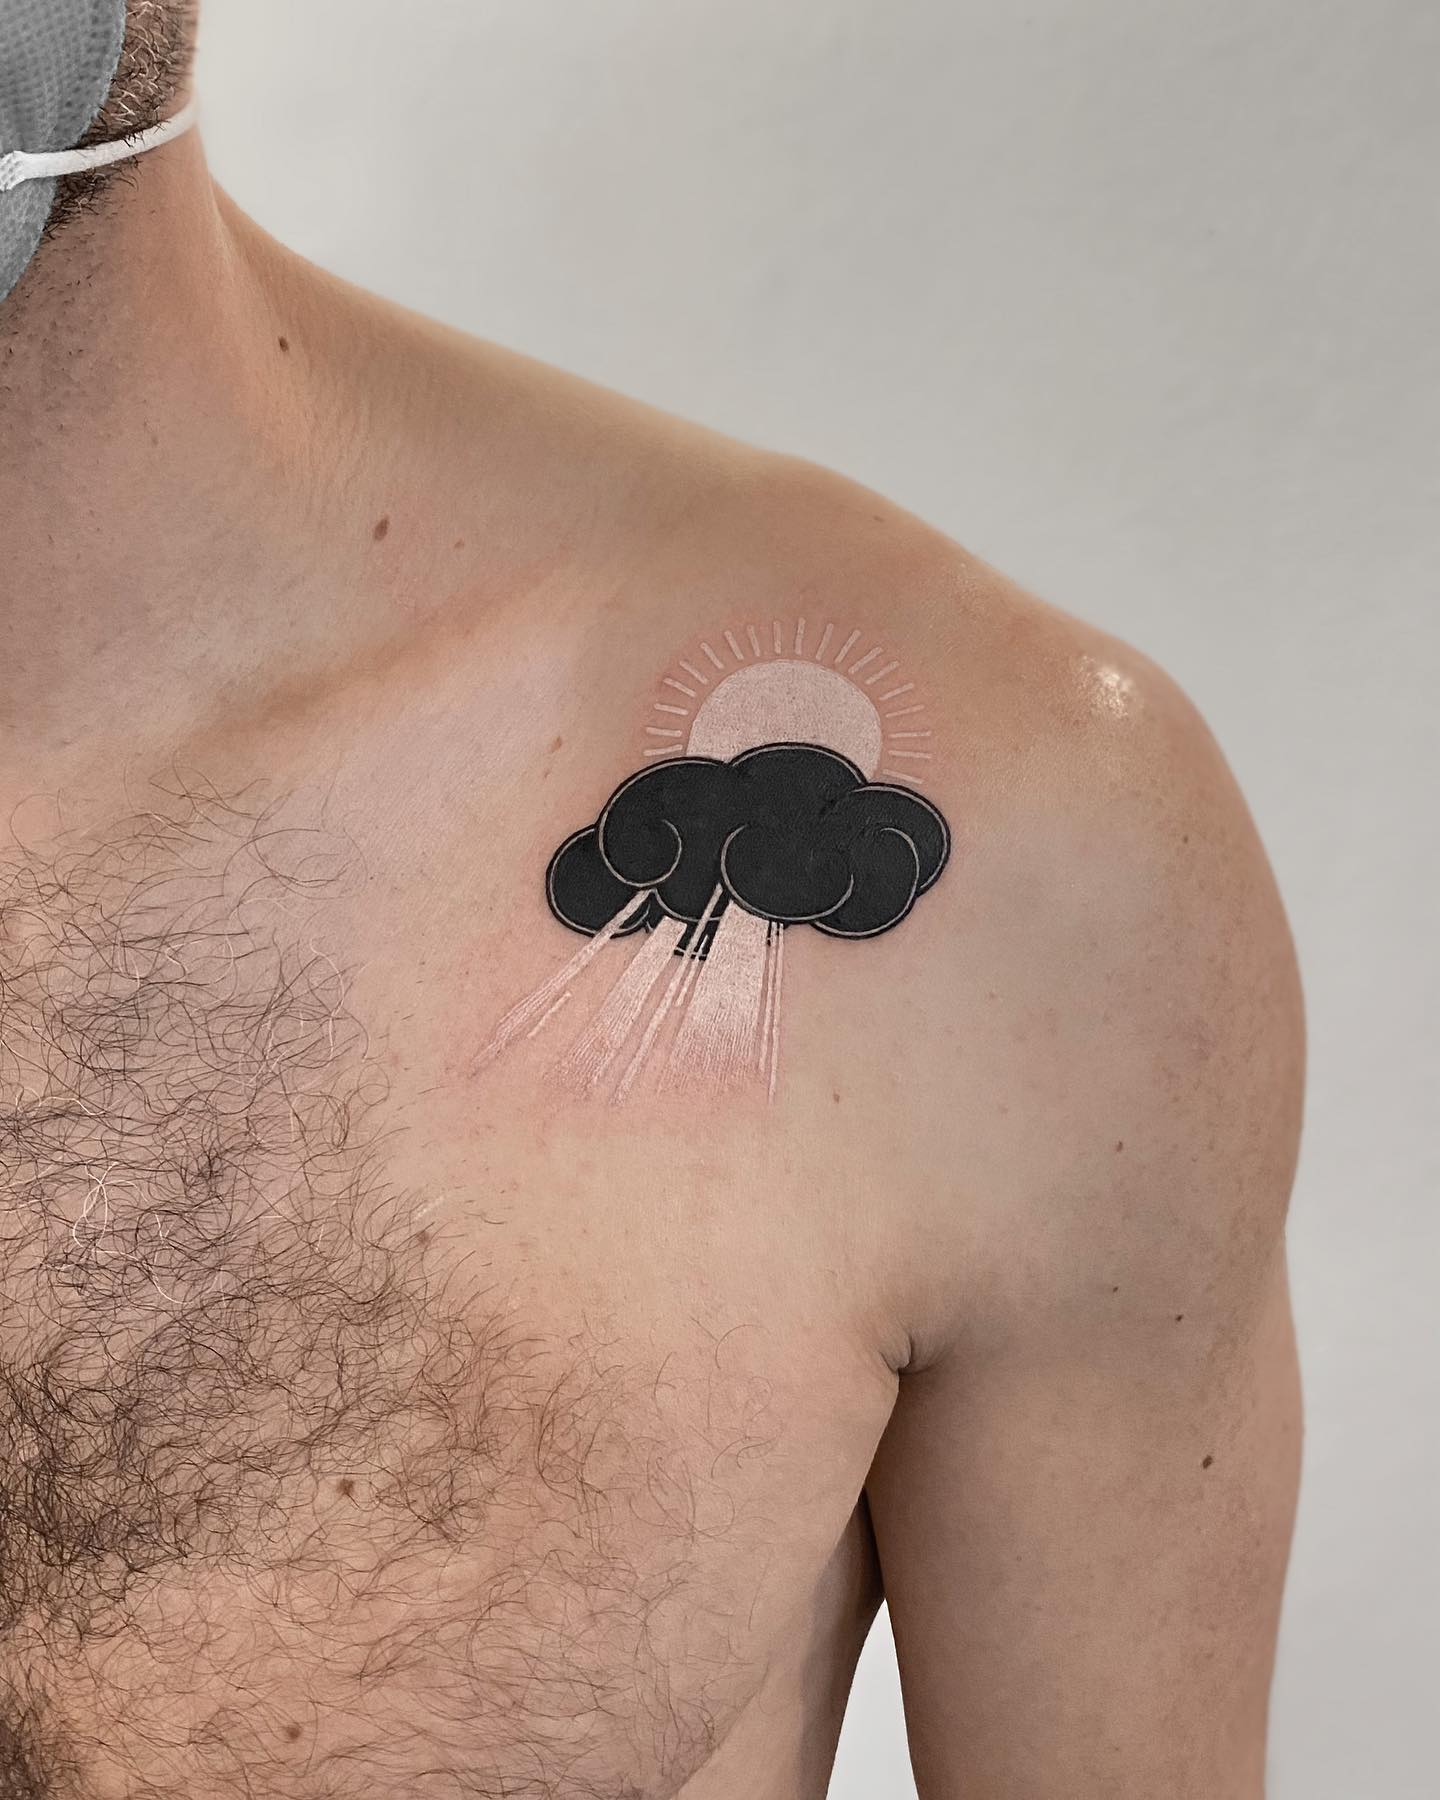 A sun tattoo is a constant reminder of how powerful the sun is and how lucky we are to live on a planet where we get to enjoy it every day. Let's get it with a white ink and apply a black cloud to make the sun stand out.